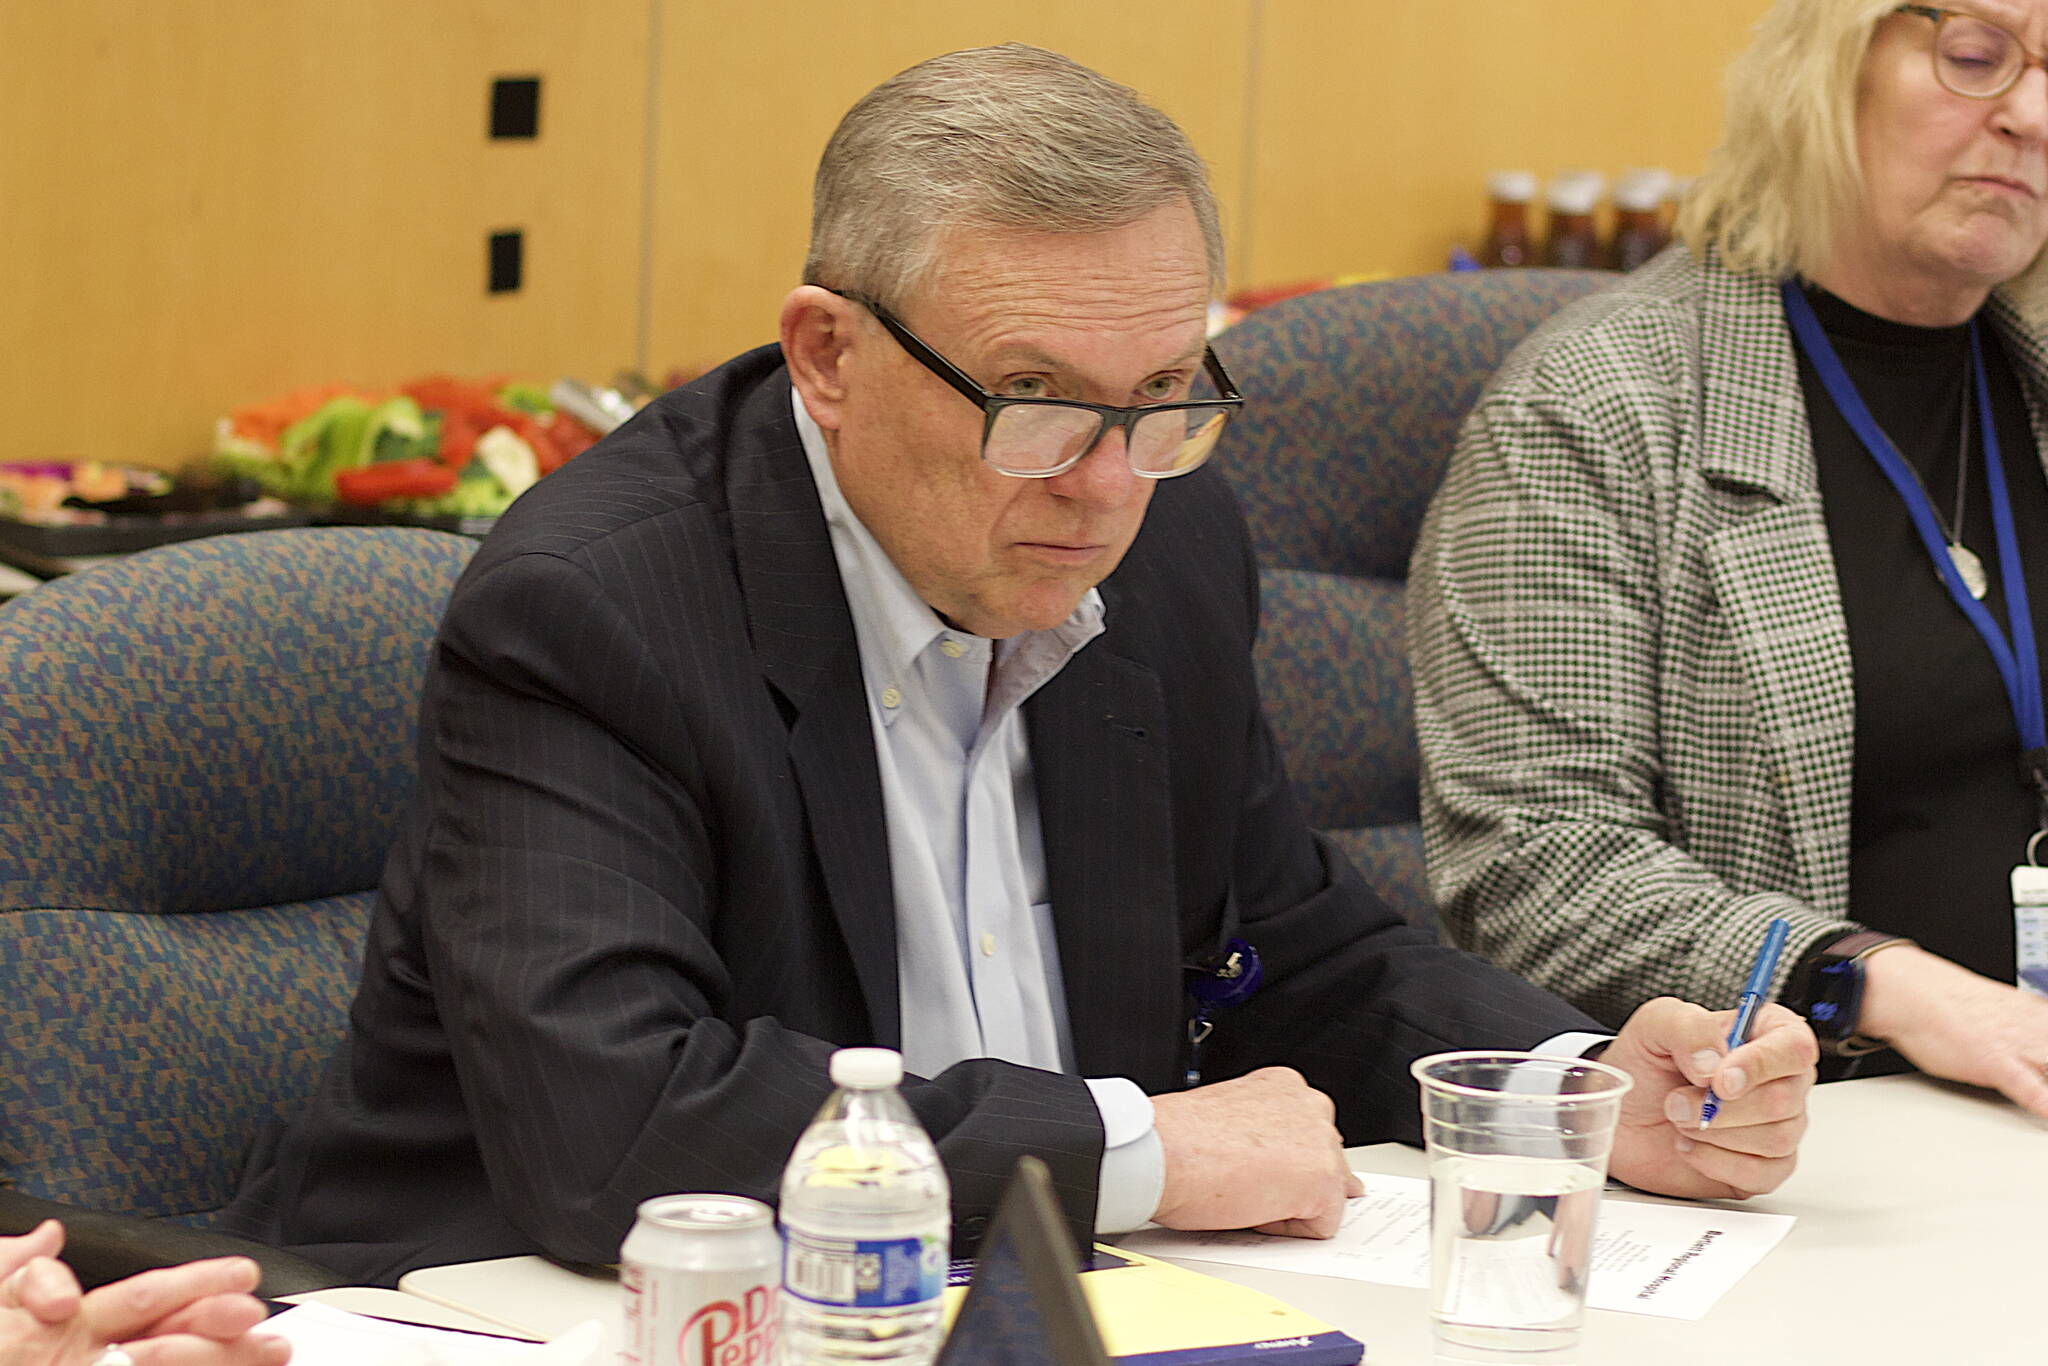 Ian Worden, interim CEO at Bartlett Regional Hospital, listens to a presentation during a board of directors meeting at the hospital on Oct. 30, his first day on the job. (Mark Sabbatini / Juneau Empire)